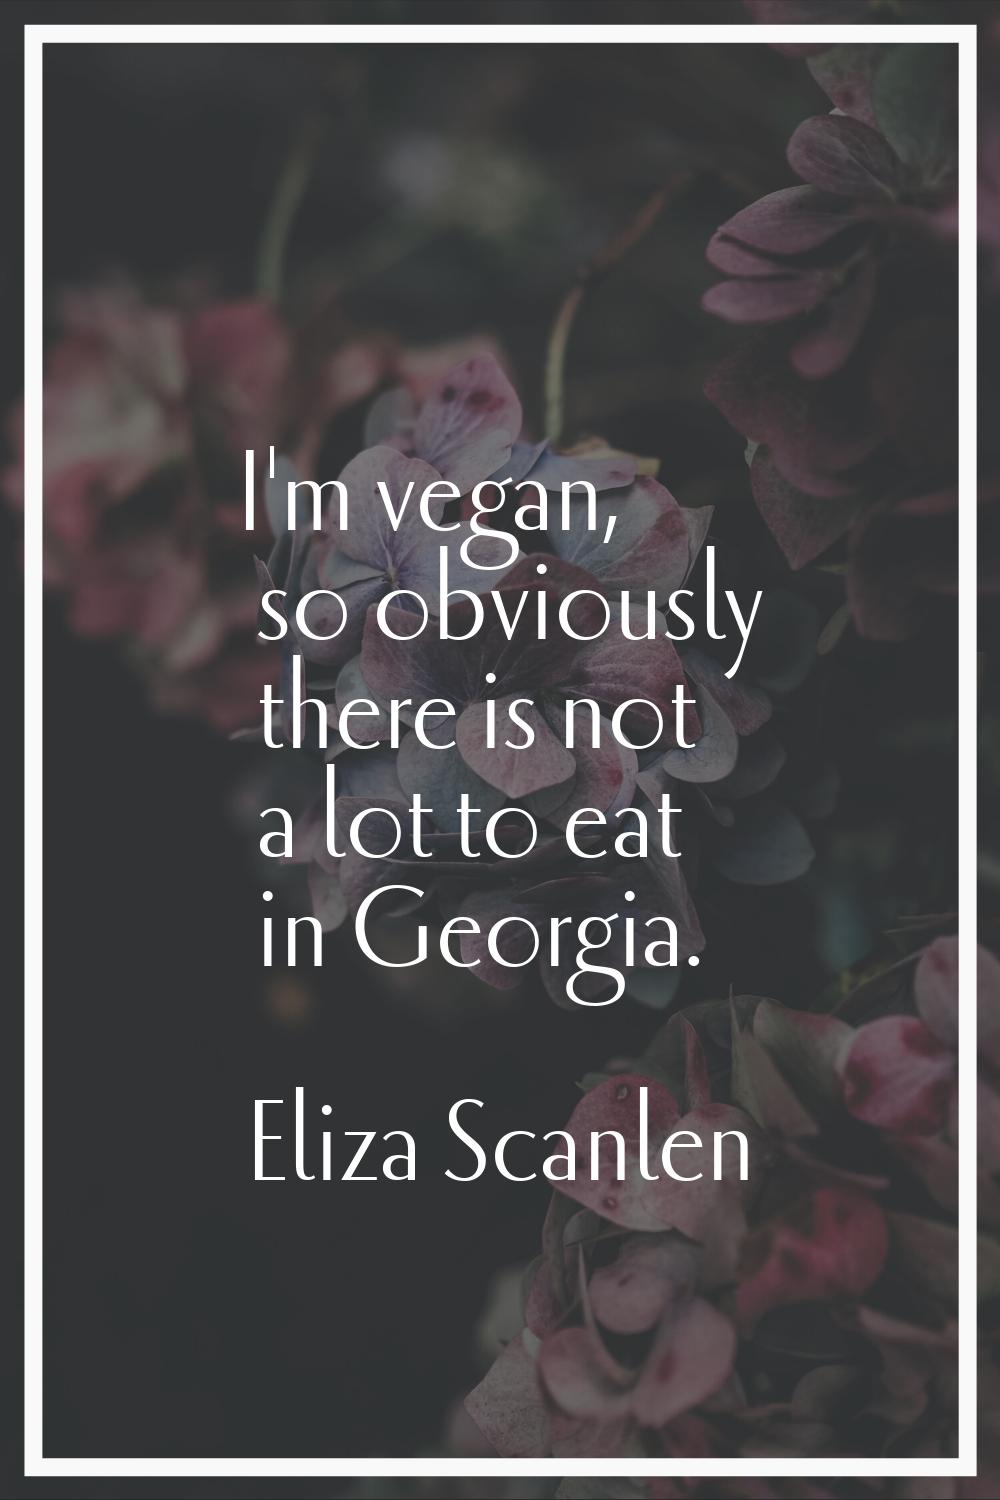 I'm vegan, so obviously there is not a lot to eat in Georgia.